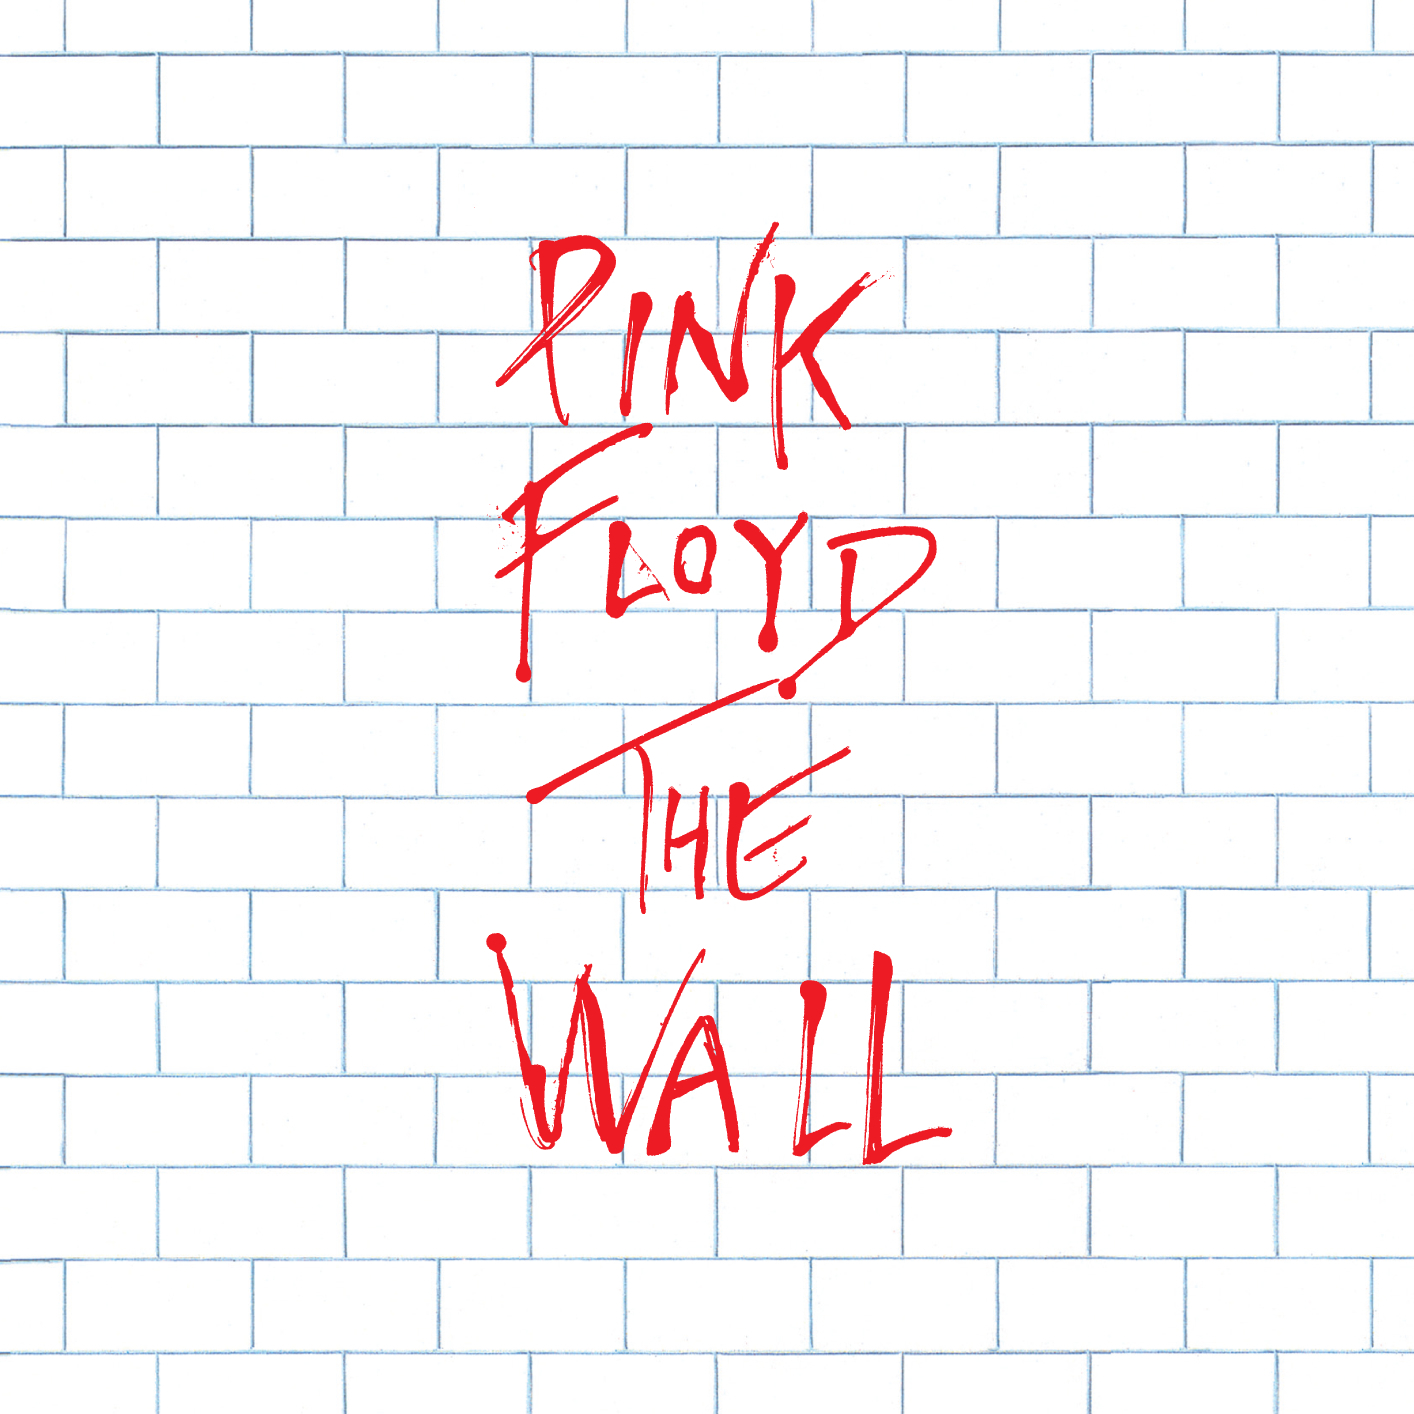 what is tbe difference between pink floyd the wall album cover with words and no words